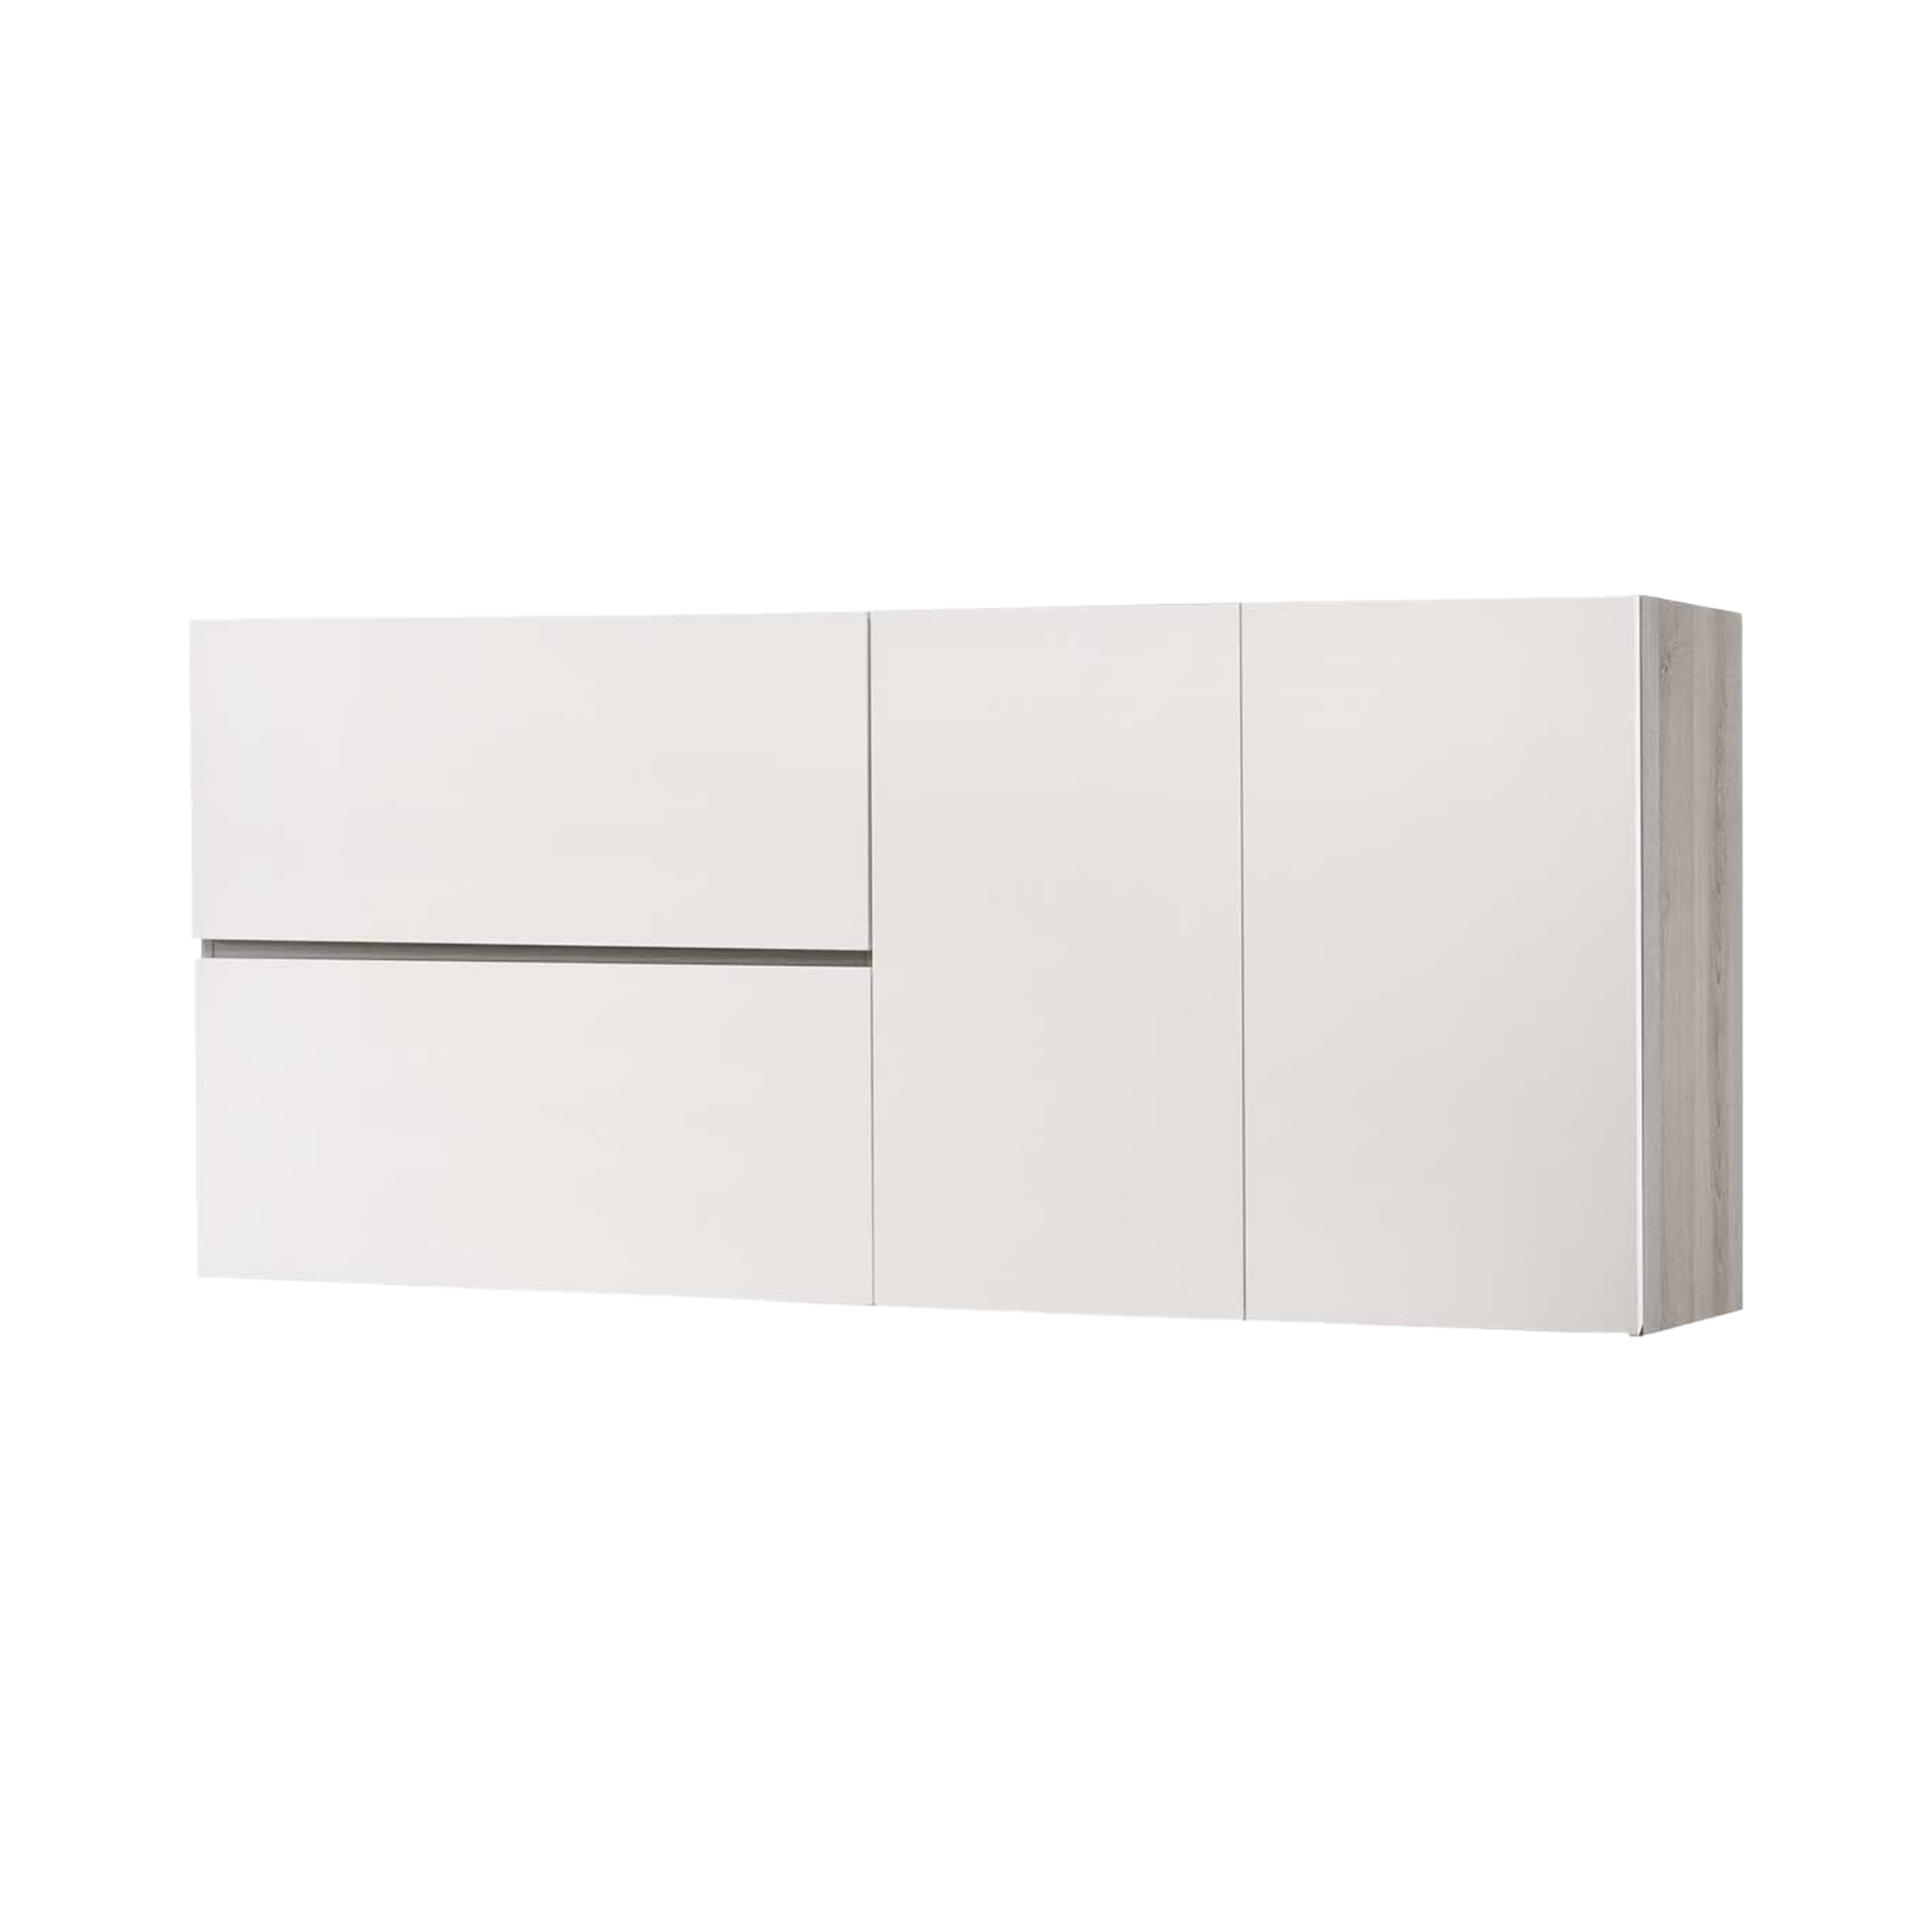 Picture of DAVINCI 6FT KITCHEN CABINET  (WALL UNIT) WITH HIGH GLOSS WHITE -  GREY OAK